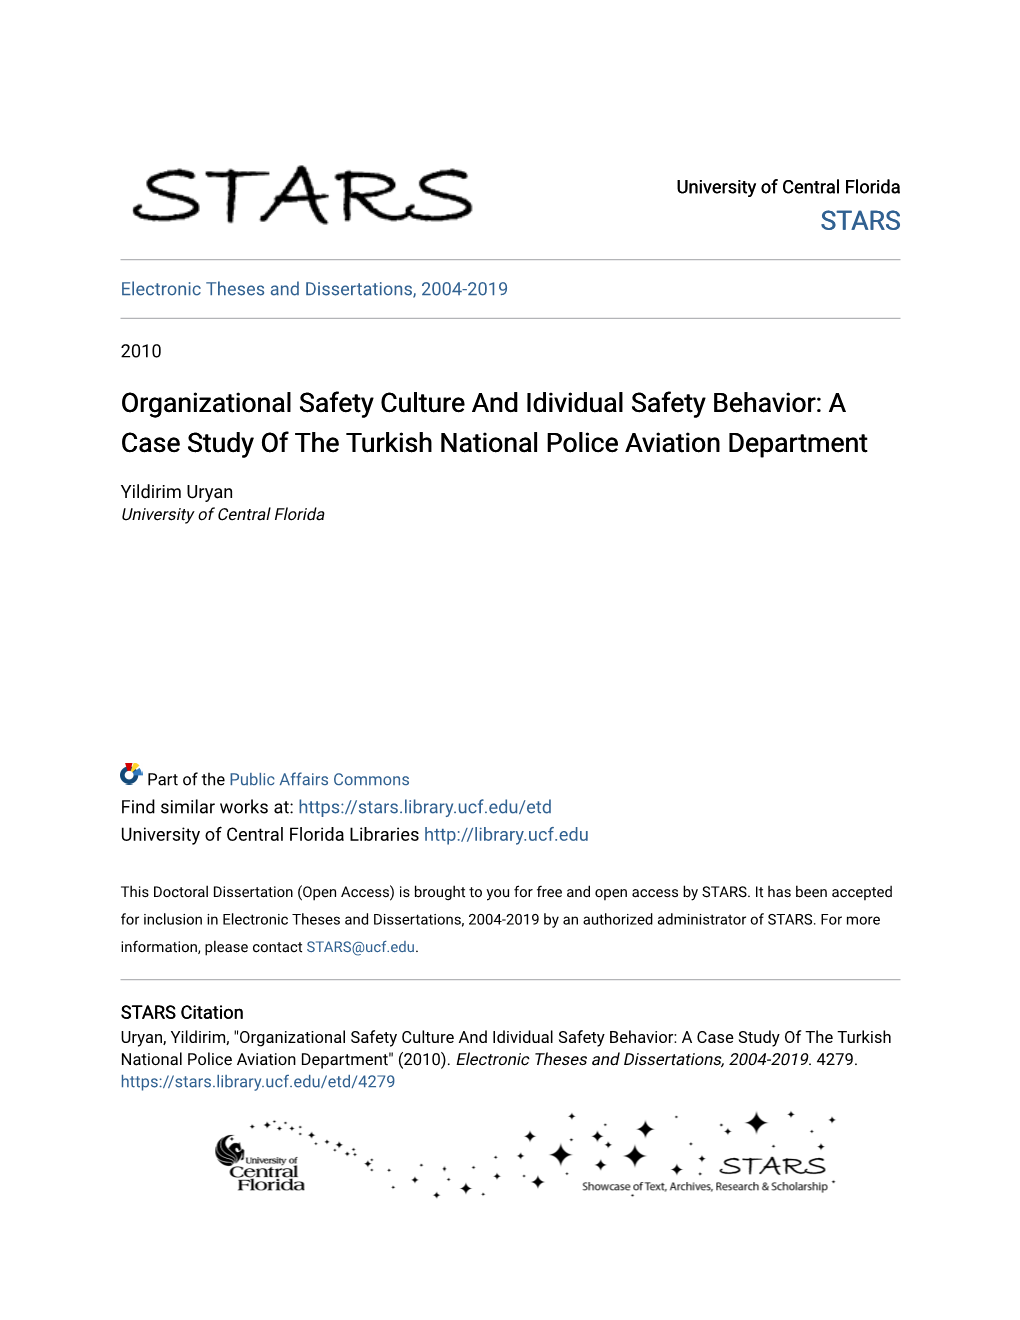 Organizational Safety Culture and Idividual Safety Behavior: a Case Study of the Turkish National Police Aviation Department